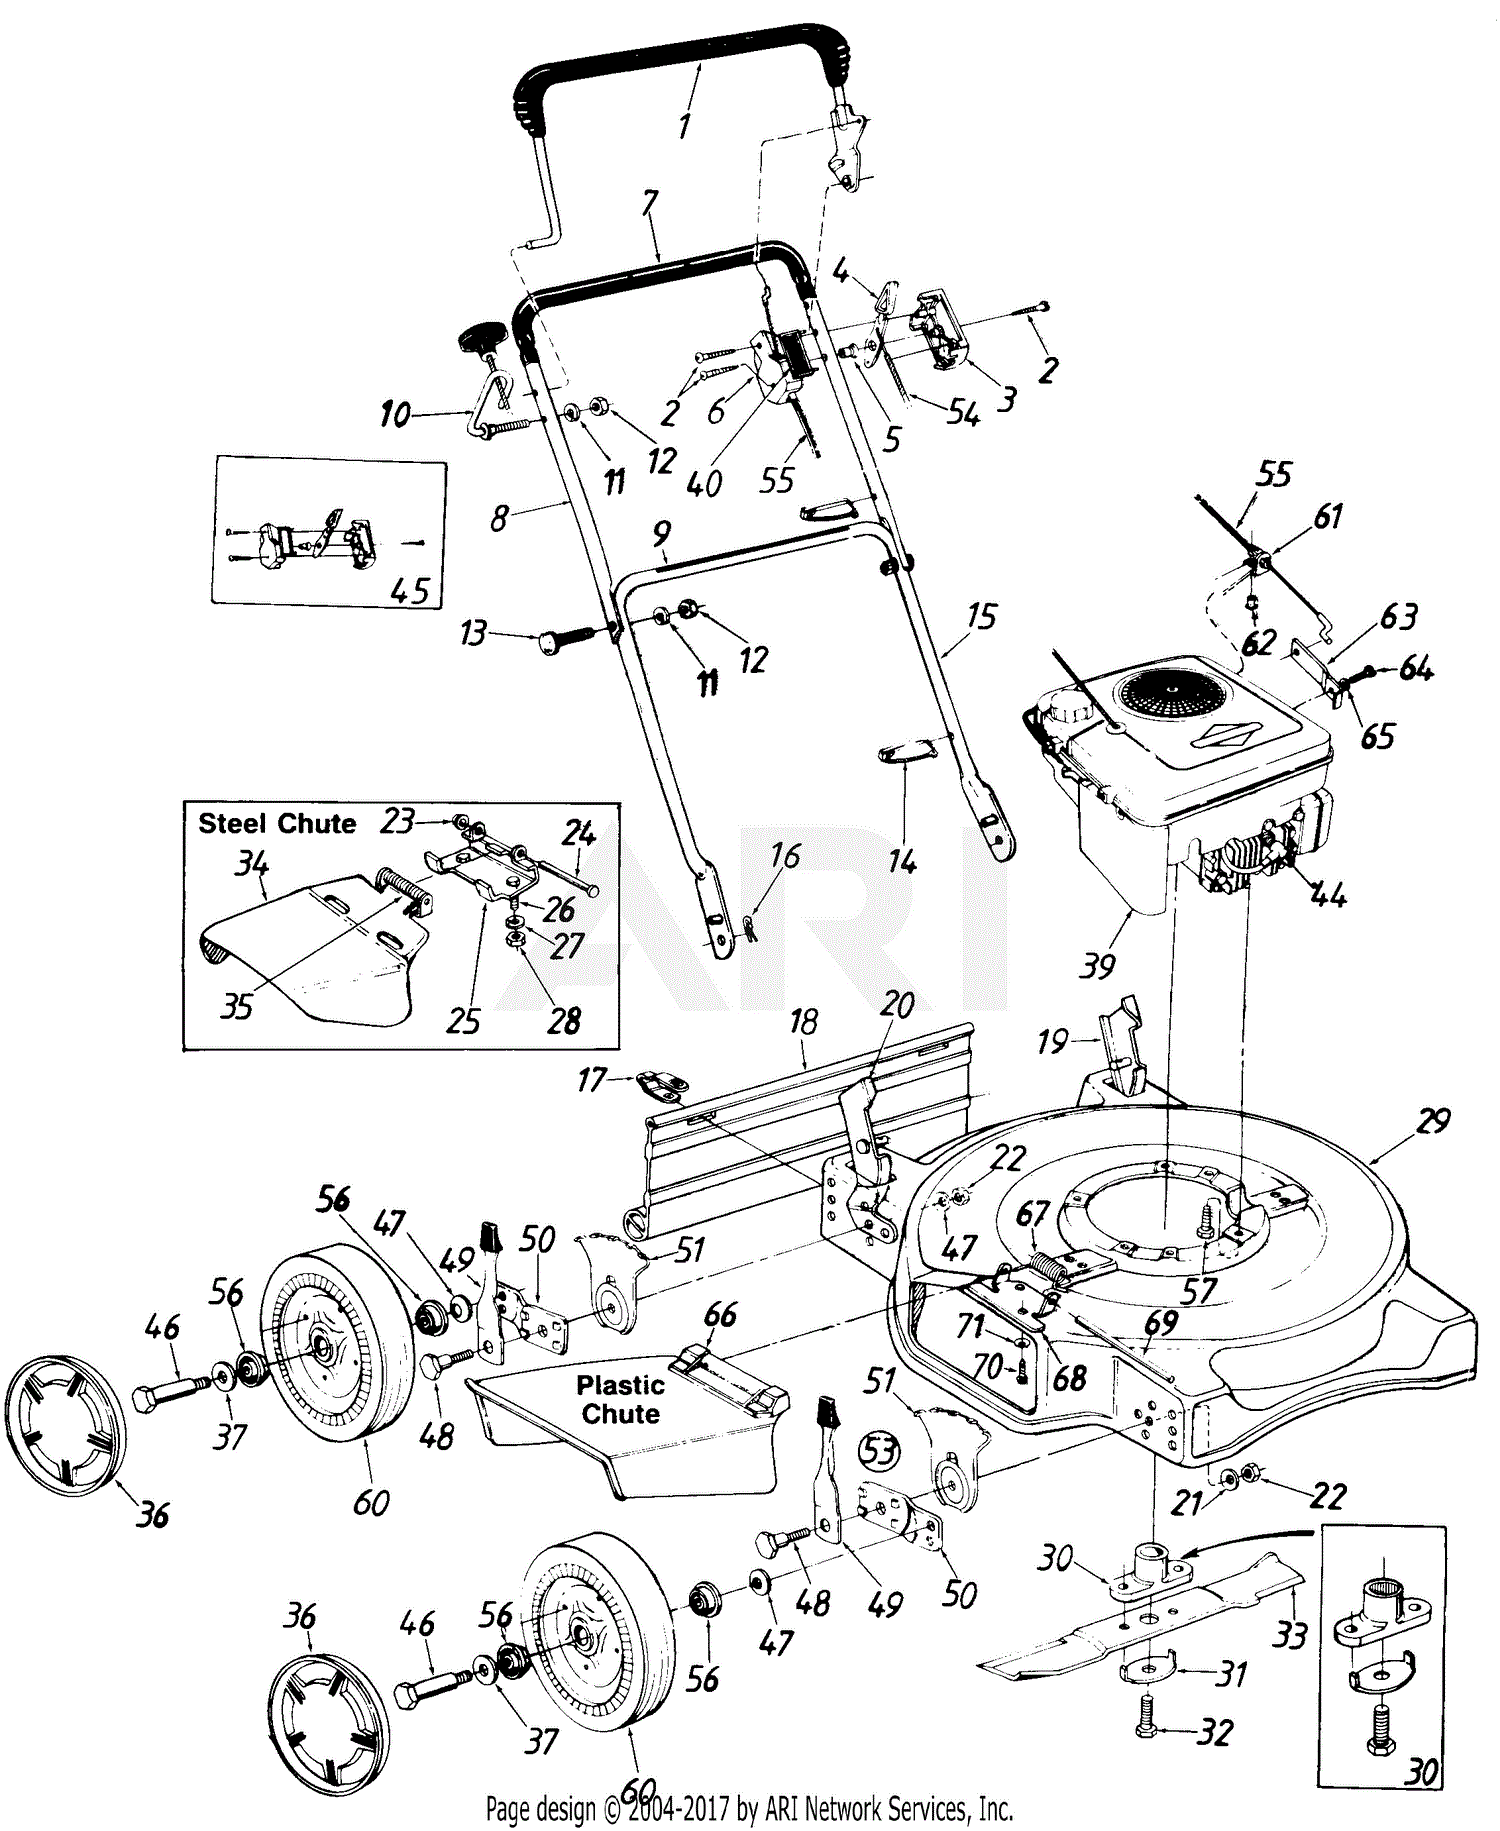 Rotary Engine Parts Diagram - Wiring Diagram